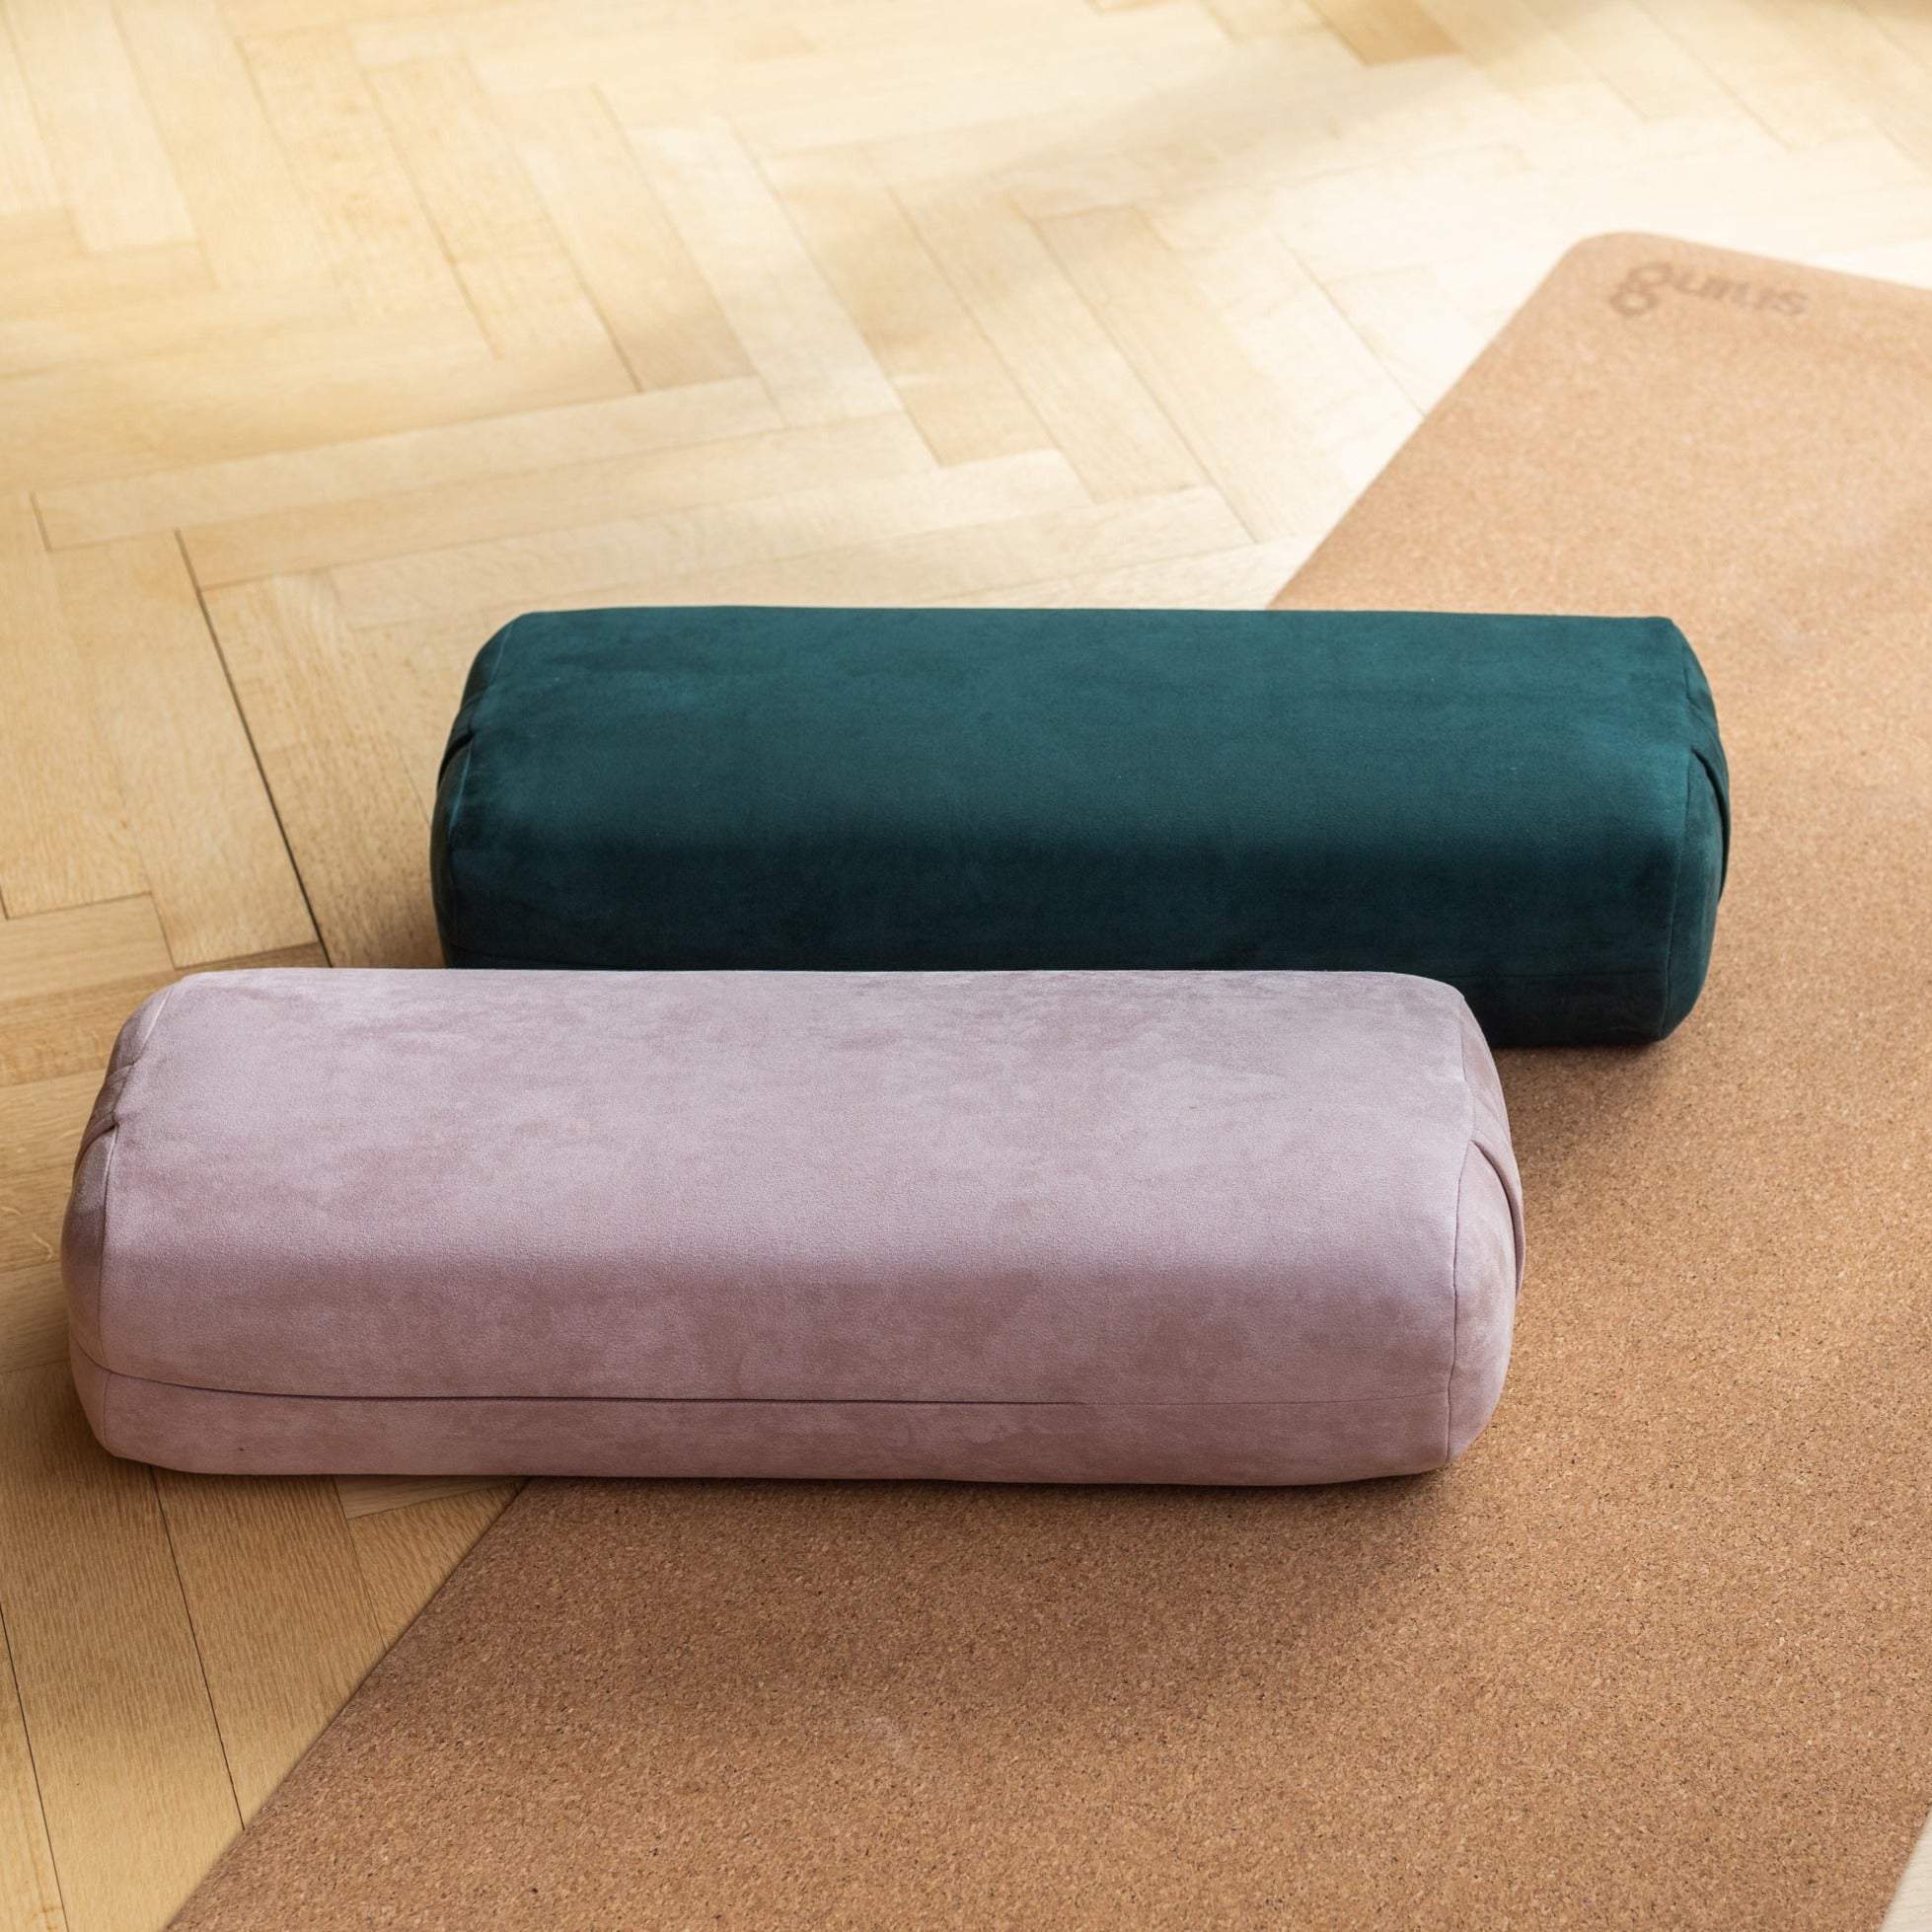 How to Choose the Best Yoga Block for Your Yoga Practice